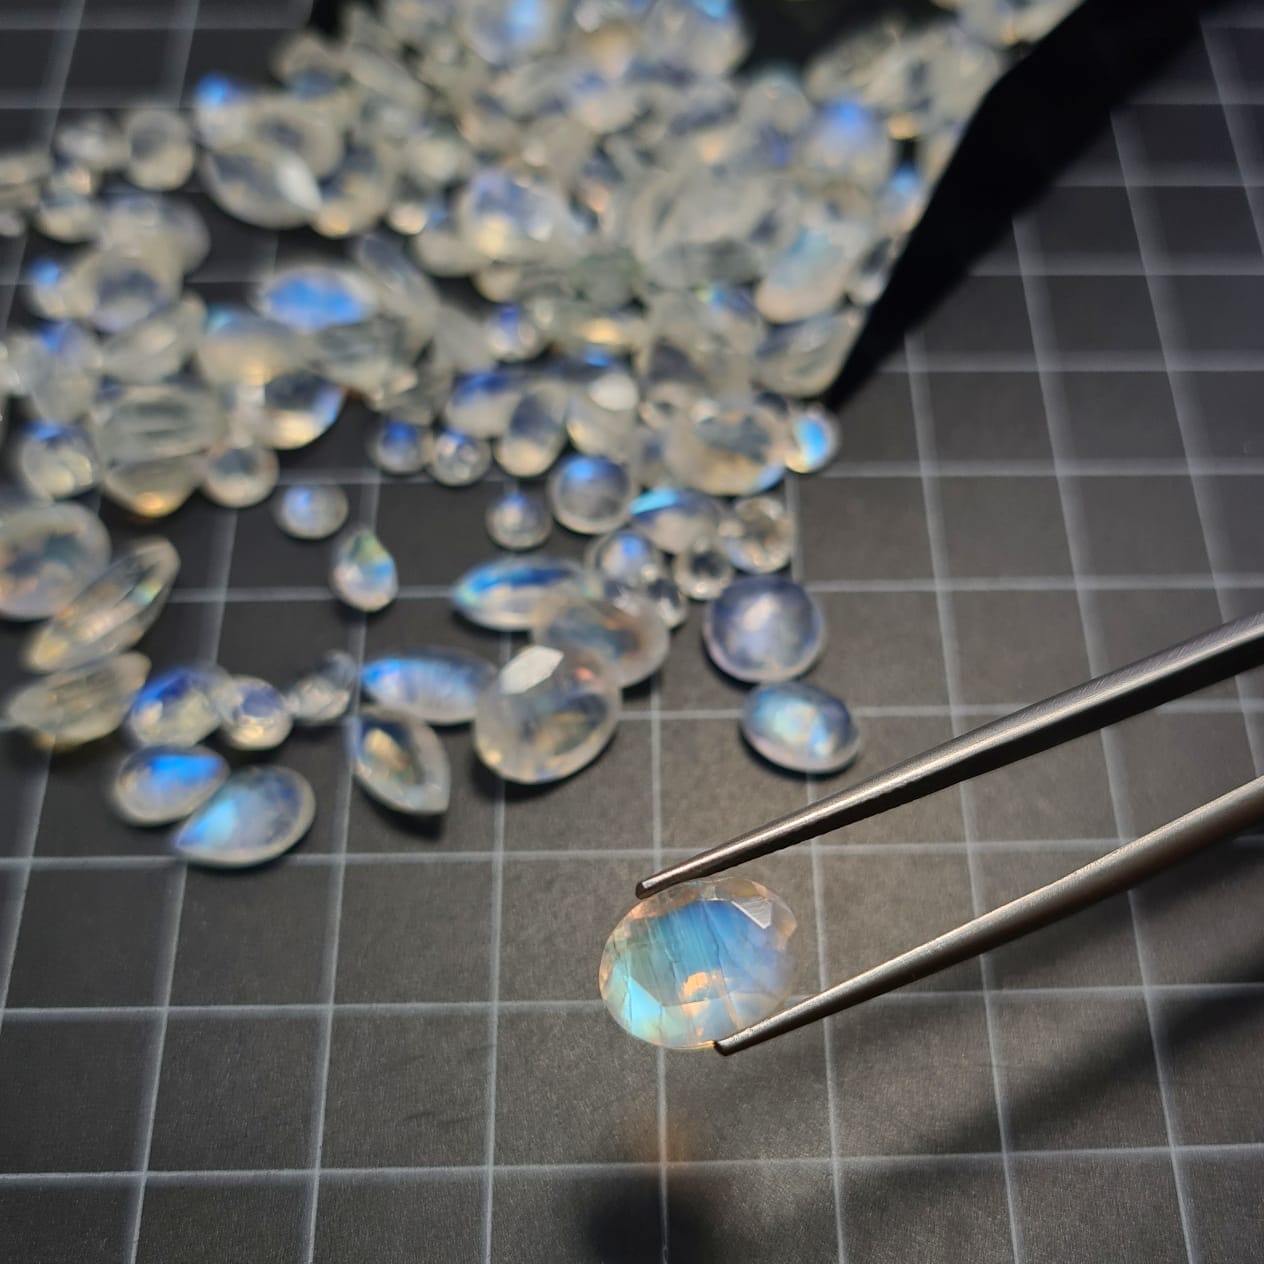 20 Pcs of High Quality Faceted Rainbow Moonstones | 5-12mm - The LabradoriteKing